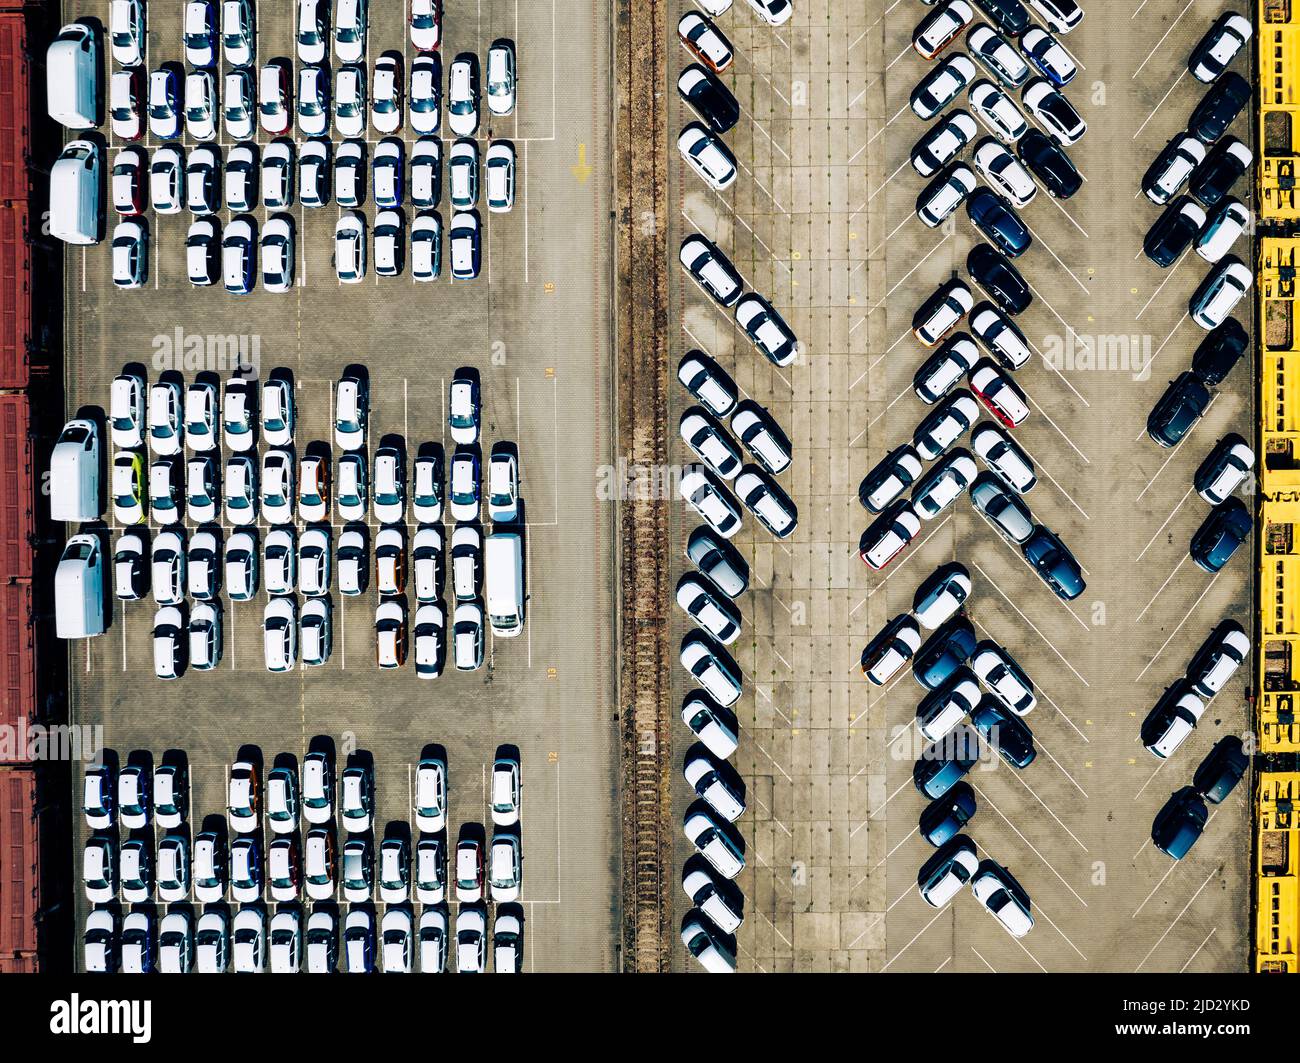 Aerial view new car lined up in the port for import and export business logistic to dealership for sale, Automobile and automotive car parking lot for Stock Photo